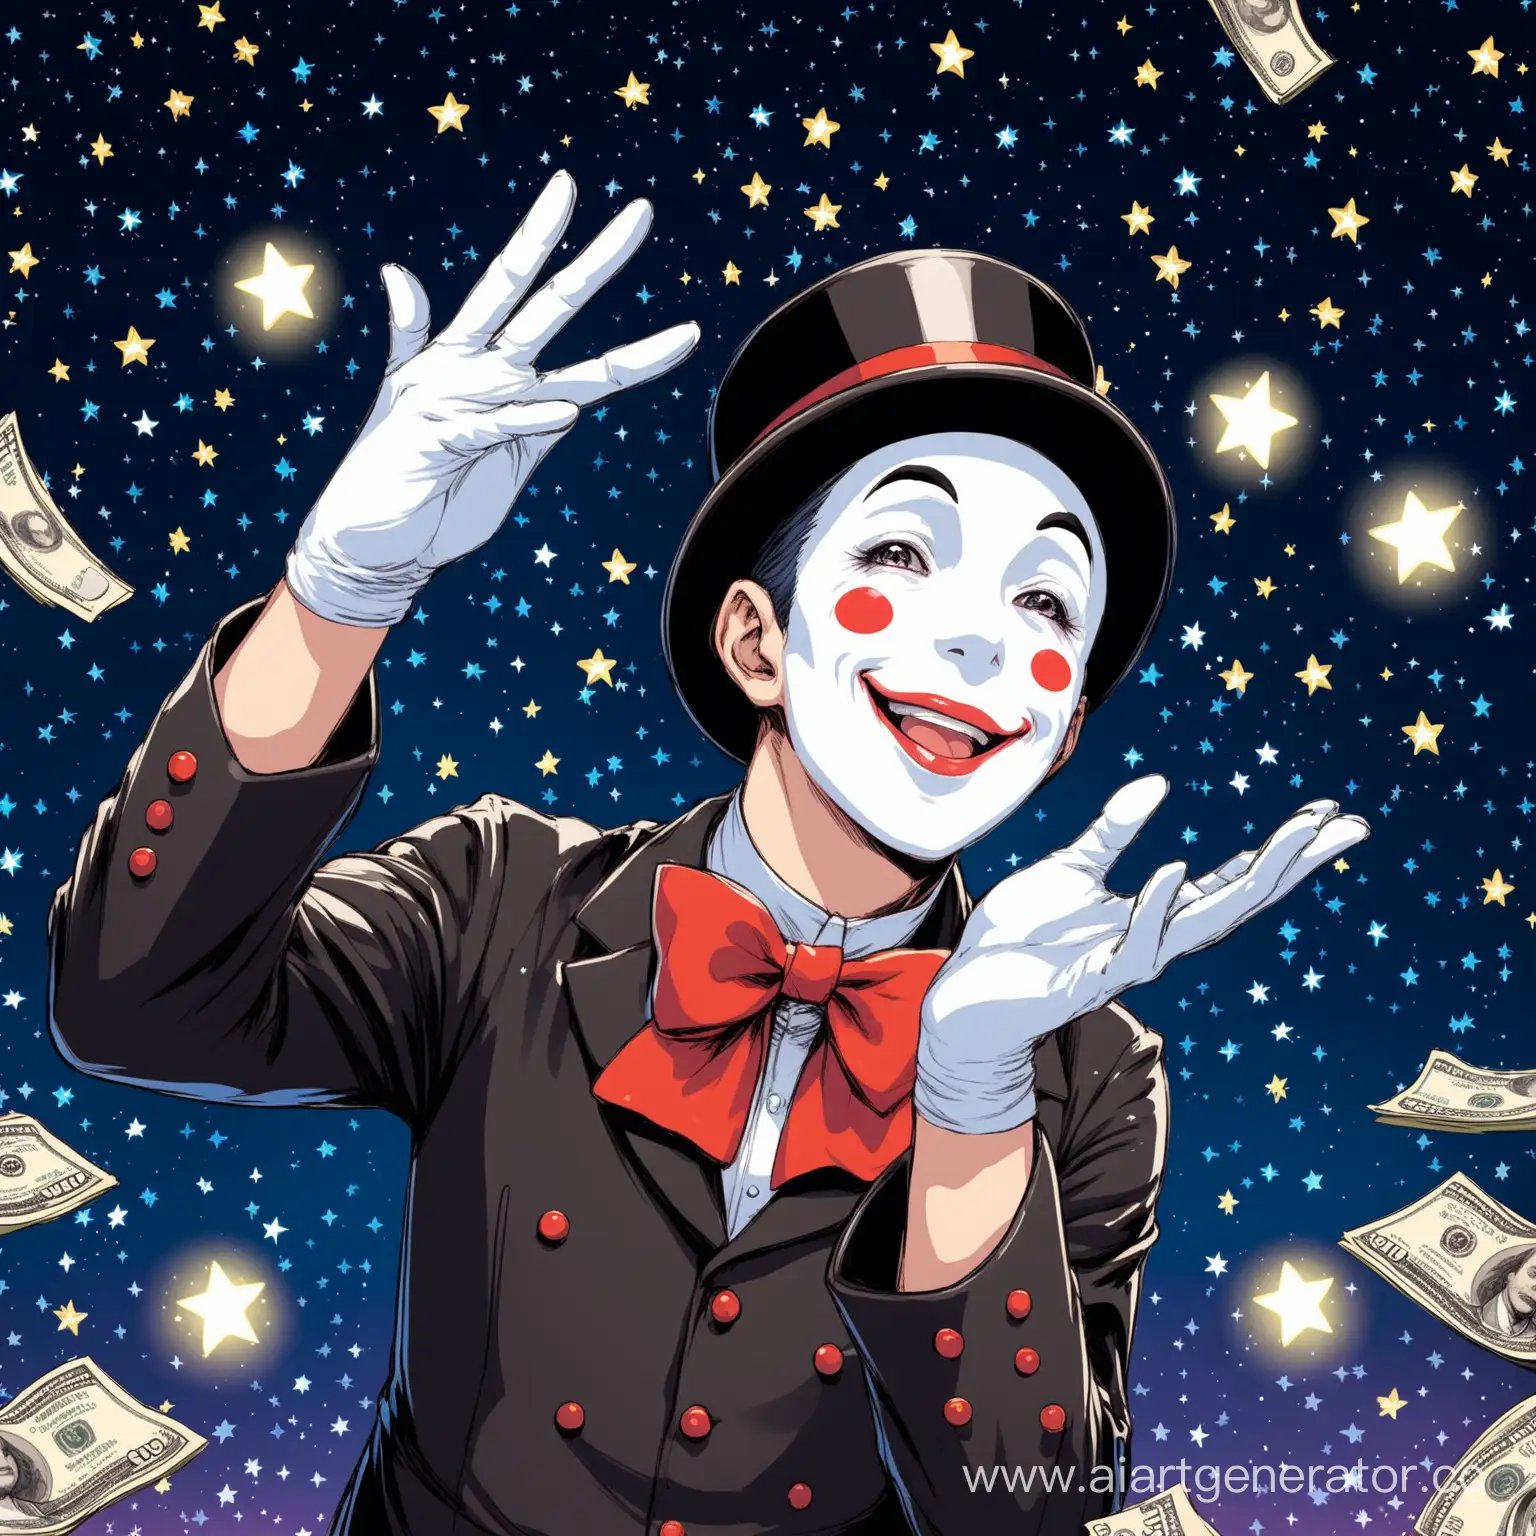 Mime-Experiencing-Joy-Holding-Money-with-Starlit-Sky-Background